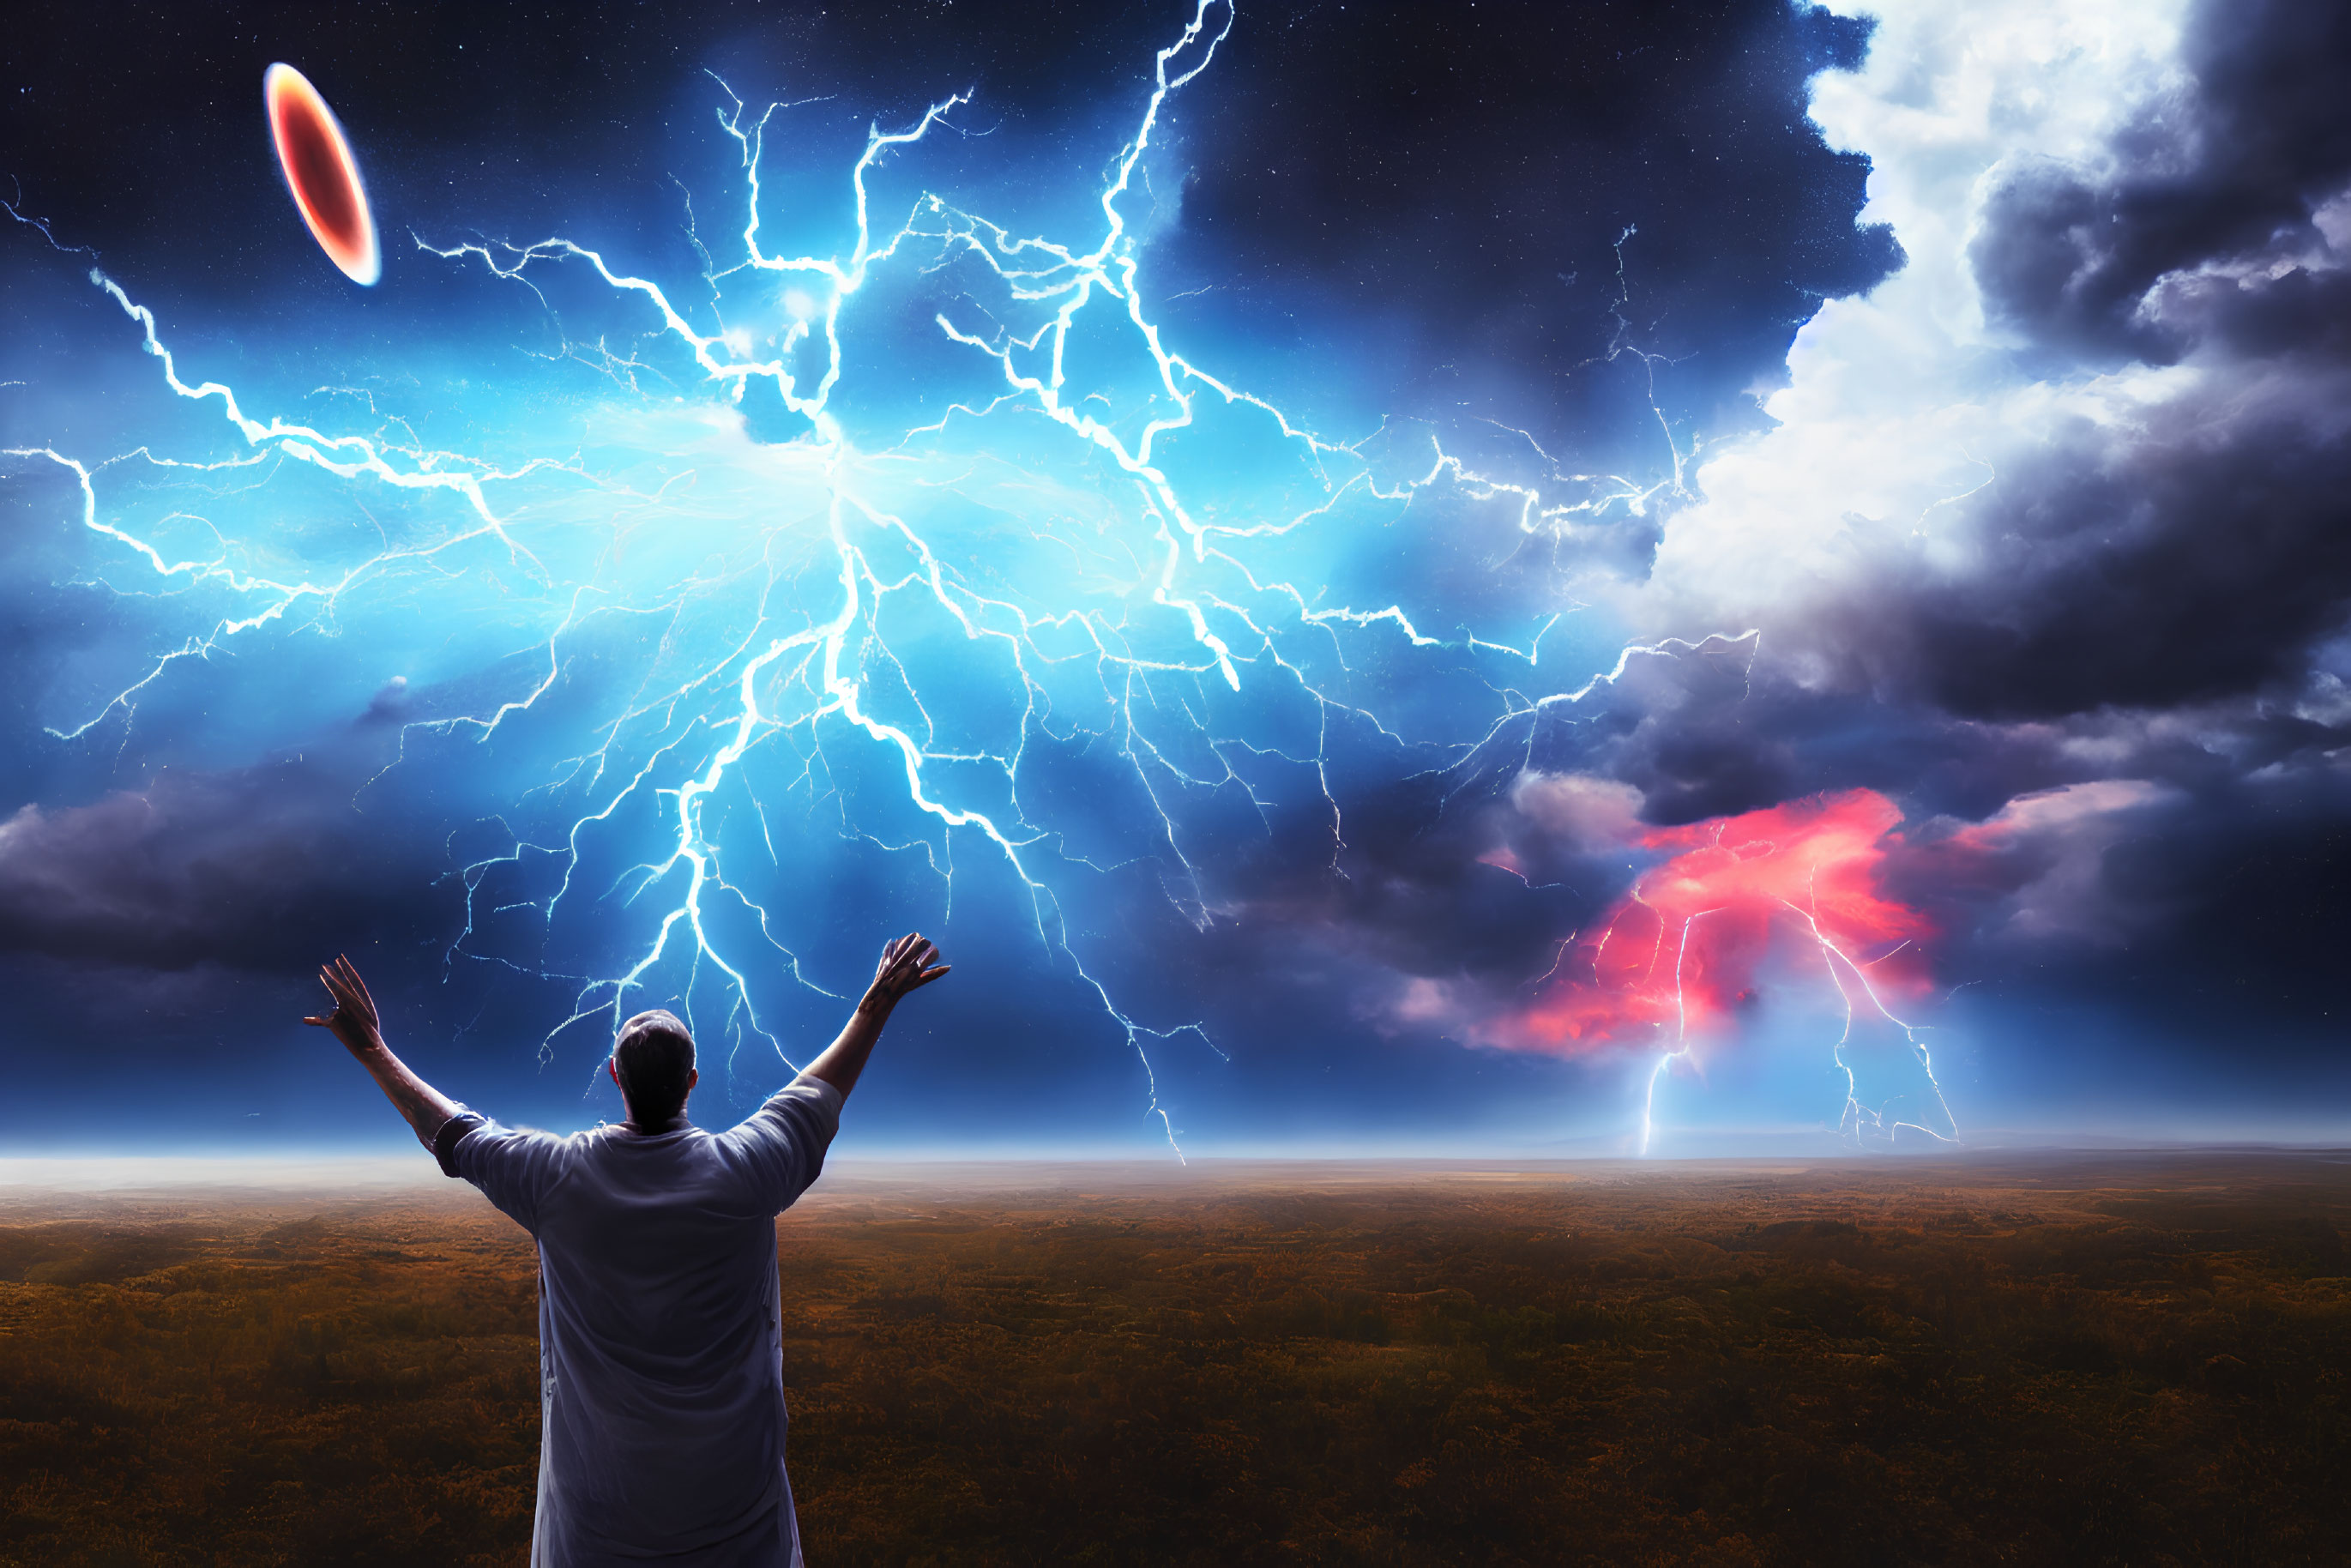 Person with raised arms under lightning-filled sky with ringed planet above landscape